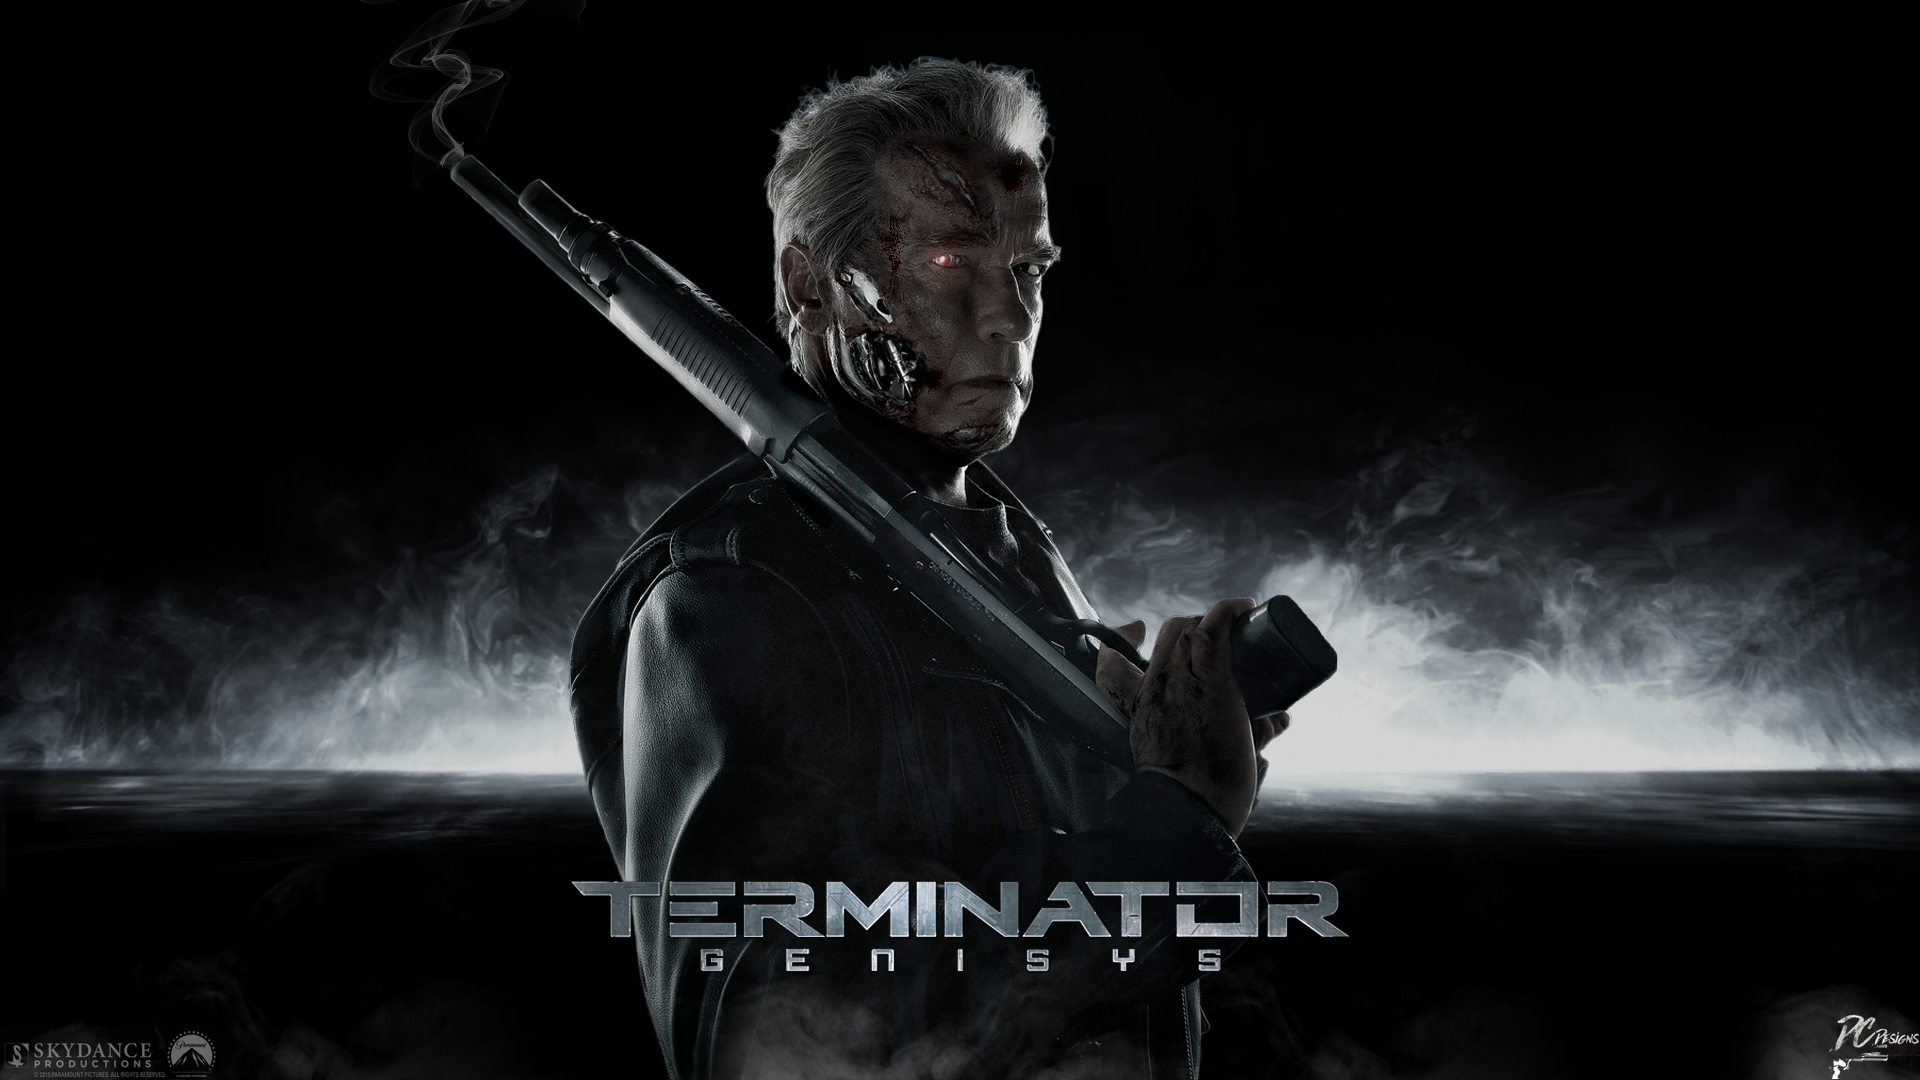 Terminator Genisys Review: Not a disaater, but not great either. For the Love of Film